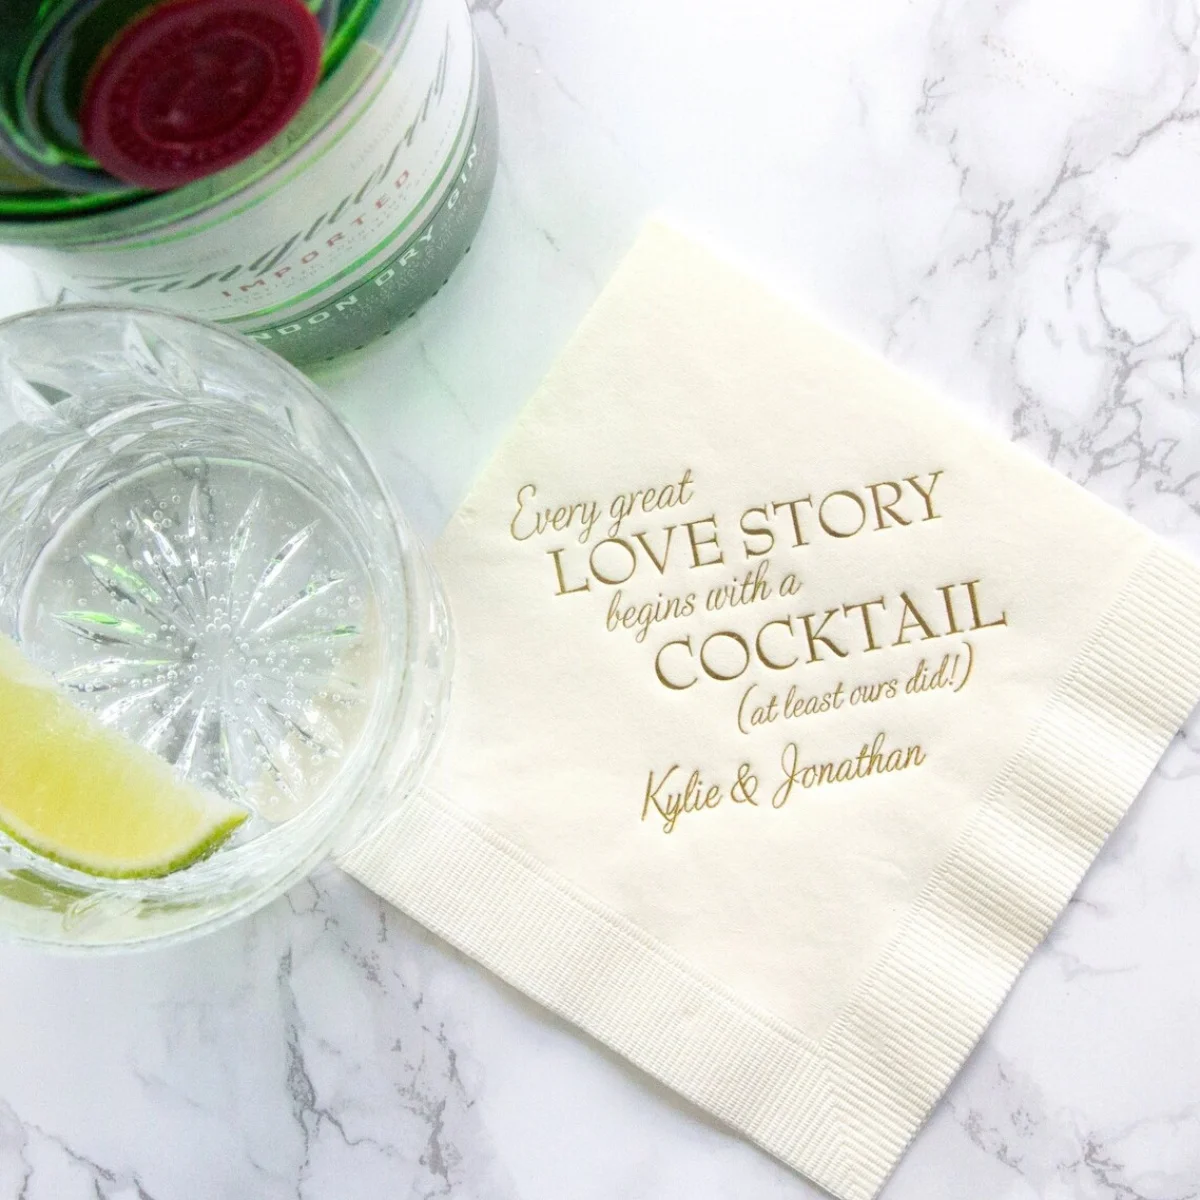 

50 Every Great Love Story Begins with a Cocktail - Personalized Wedding Napkins, Rehearsal Dinner, Engagement Party, Custom Bar